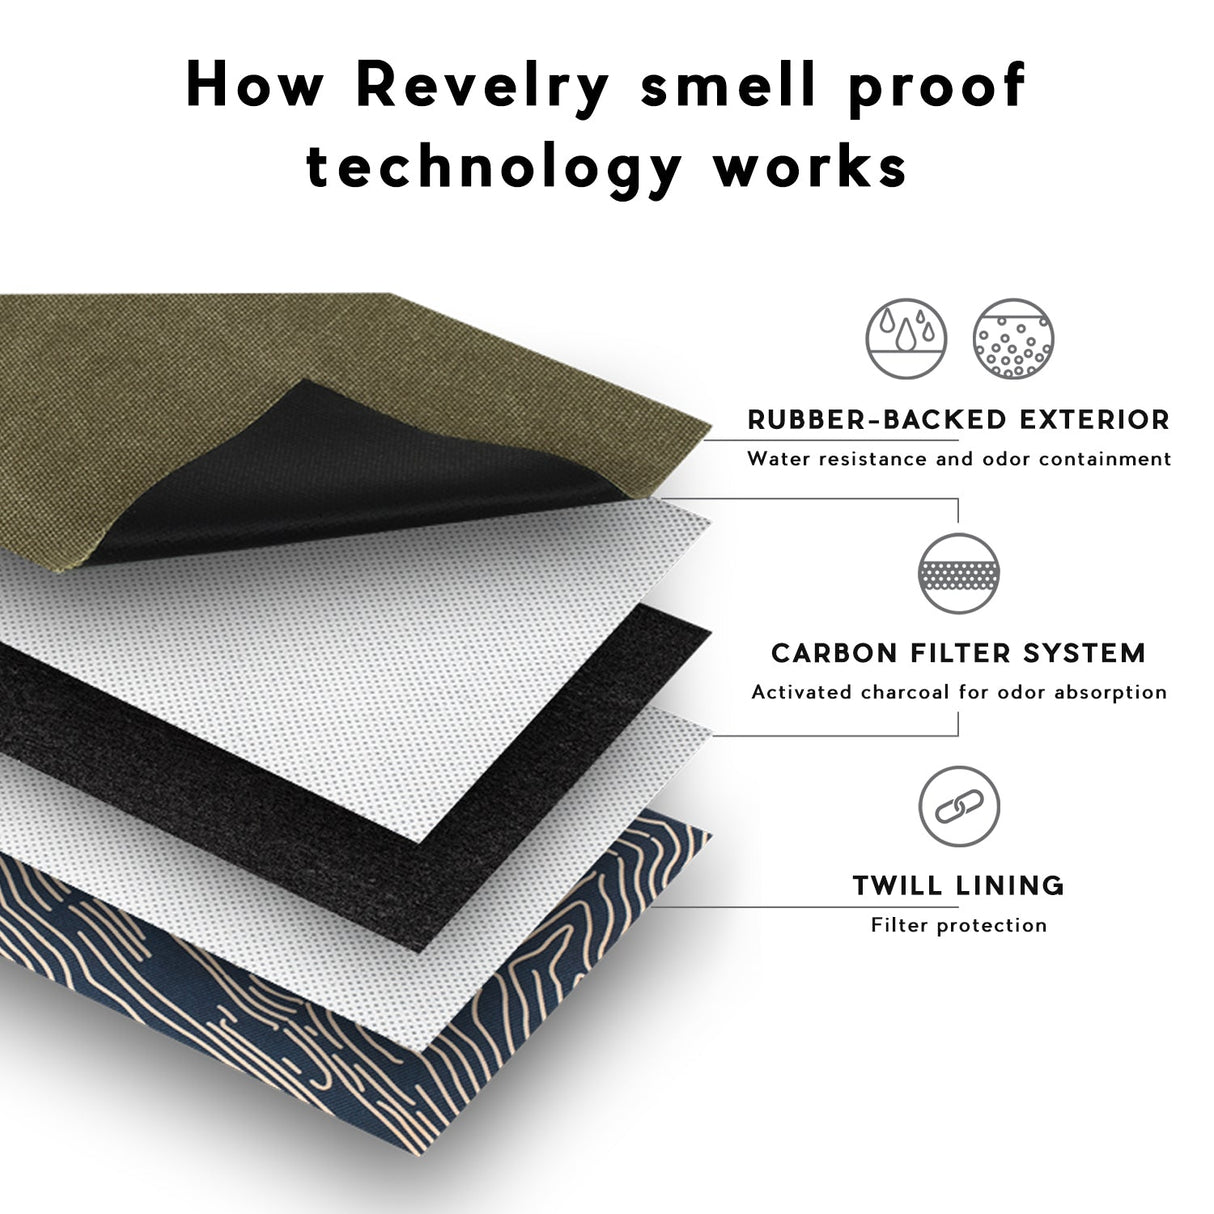 Revelry Supply's The Drifter backpack materials showing smell proof technology layers